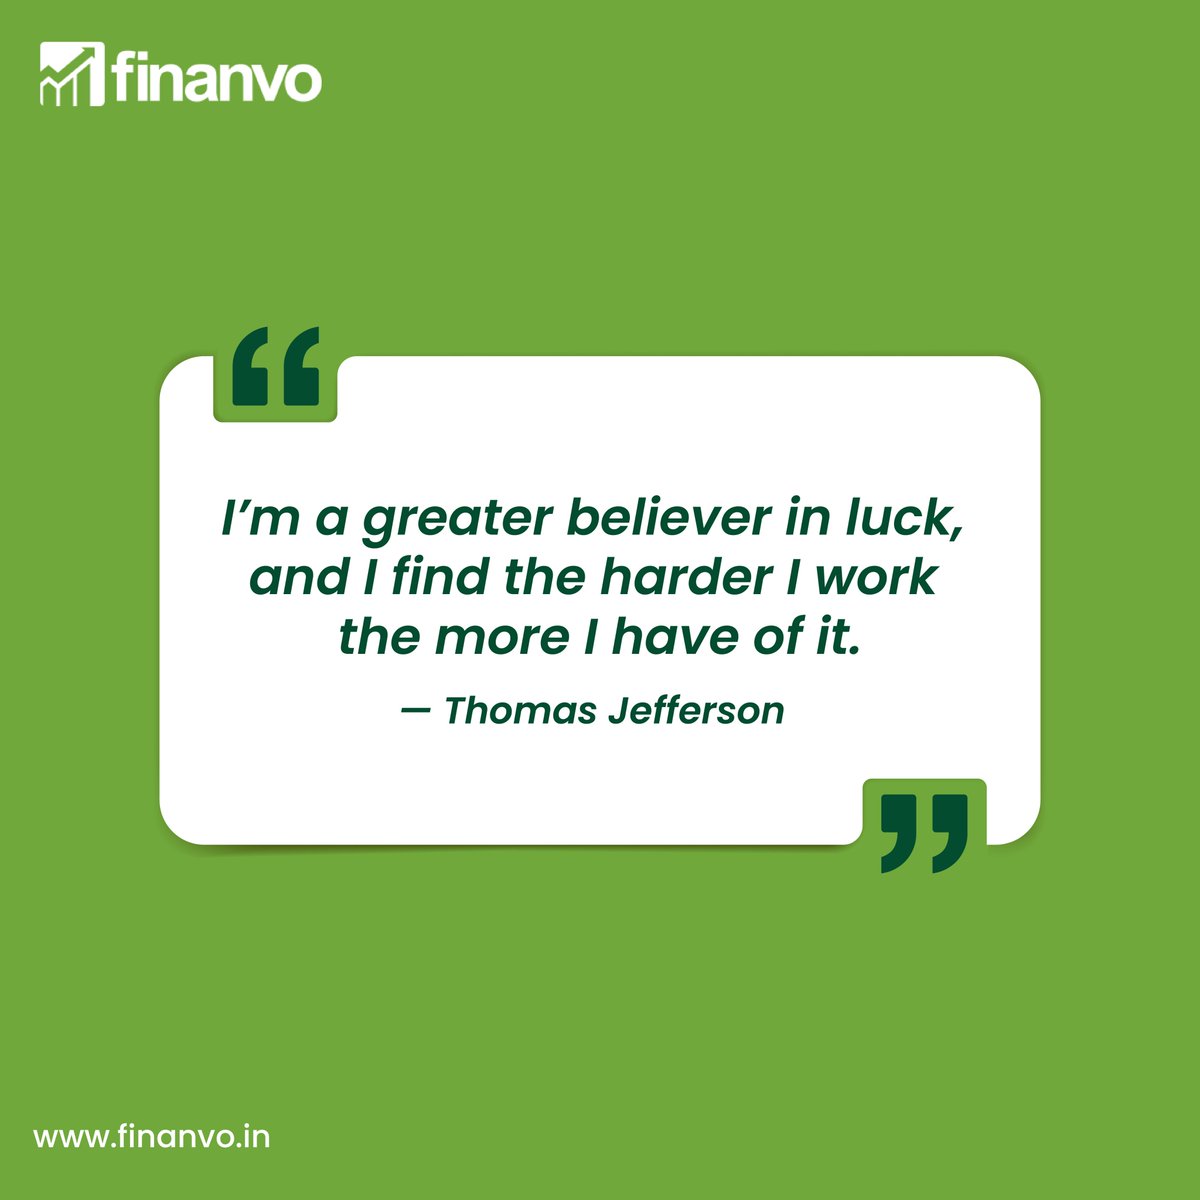 The more #effort and #Hardwork you put into something, the luckier you tend to get. Hard work opens doors to #opportunities, which can often be seen as #luck.

#Finanvo #DataInsights #BusinessSuccess #StabilityAndAgility #ForwardMotion #BalanceInBusiness #MondayMotivational